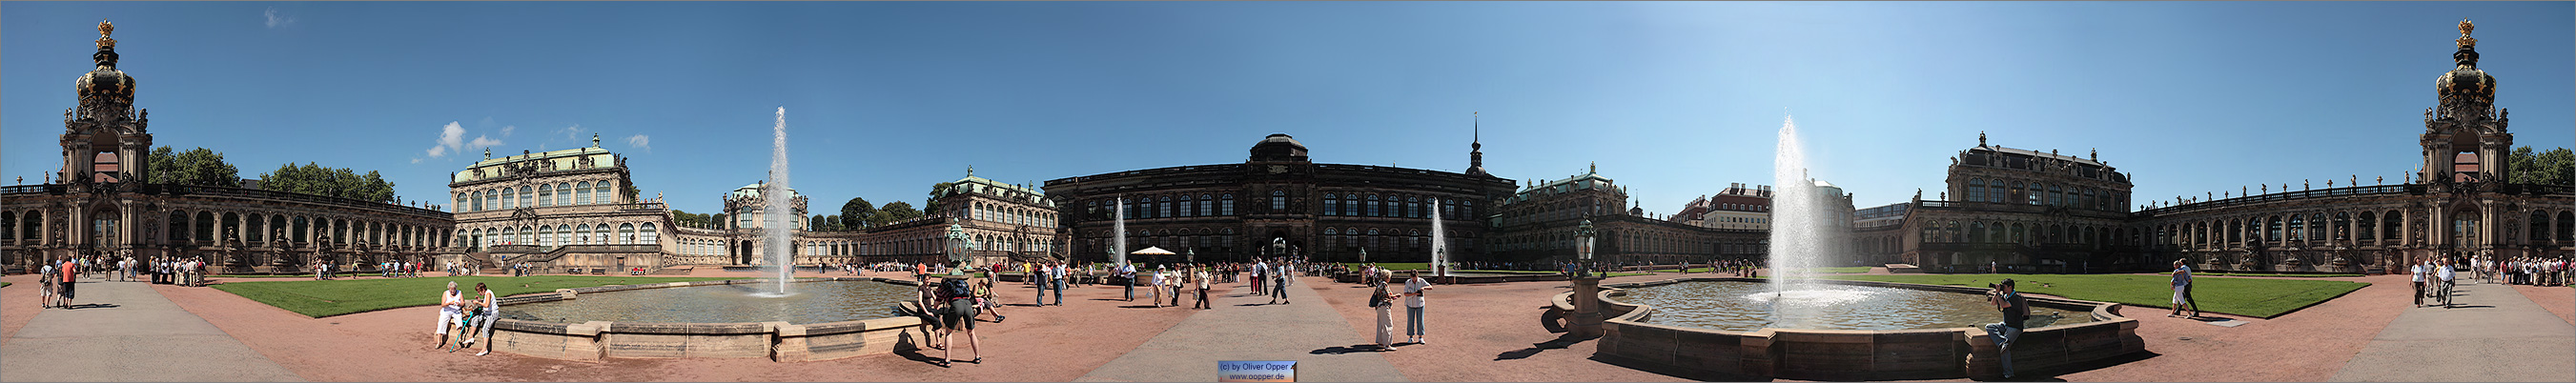 Panorama Dresden - Zwinger - p20 - (c) by Oliver Opper